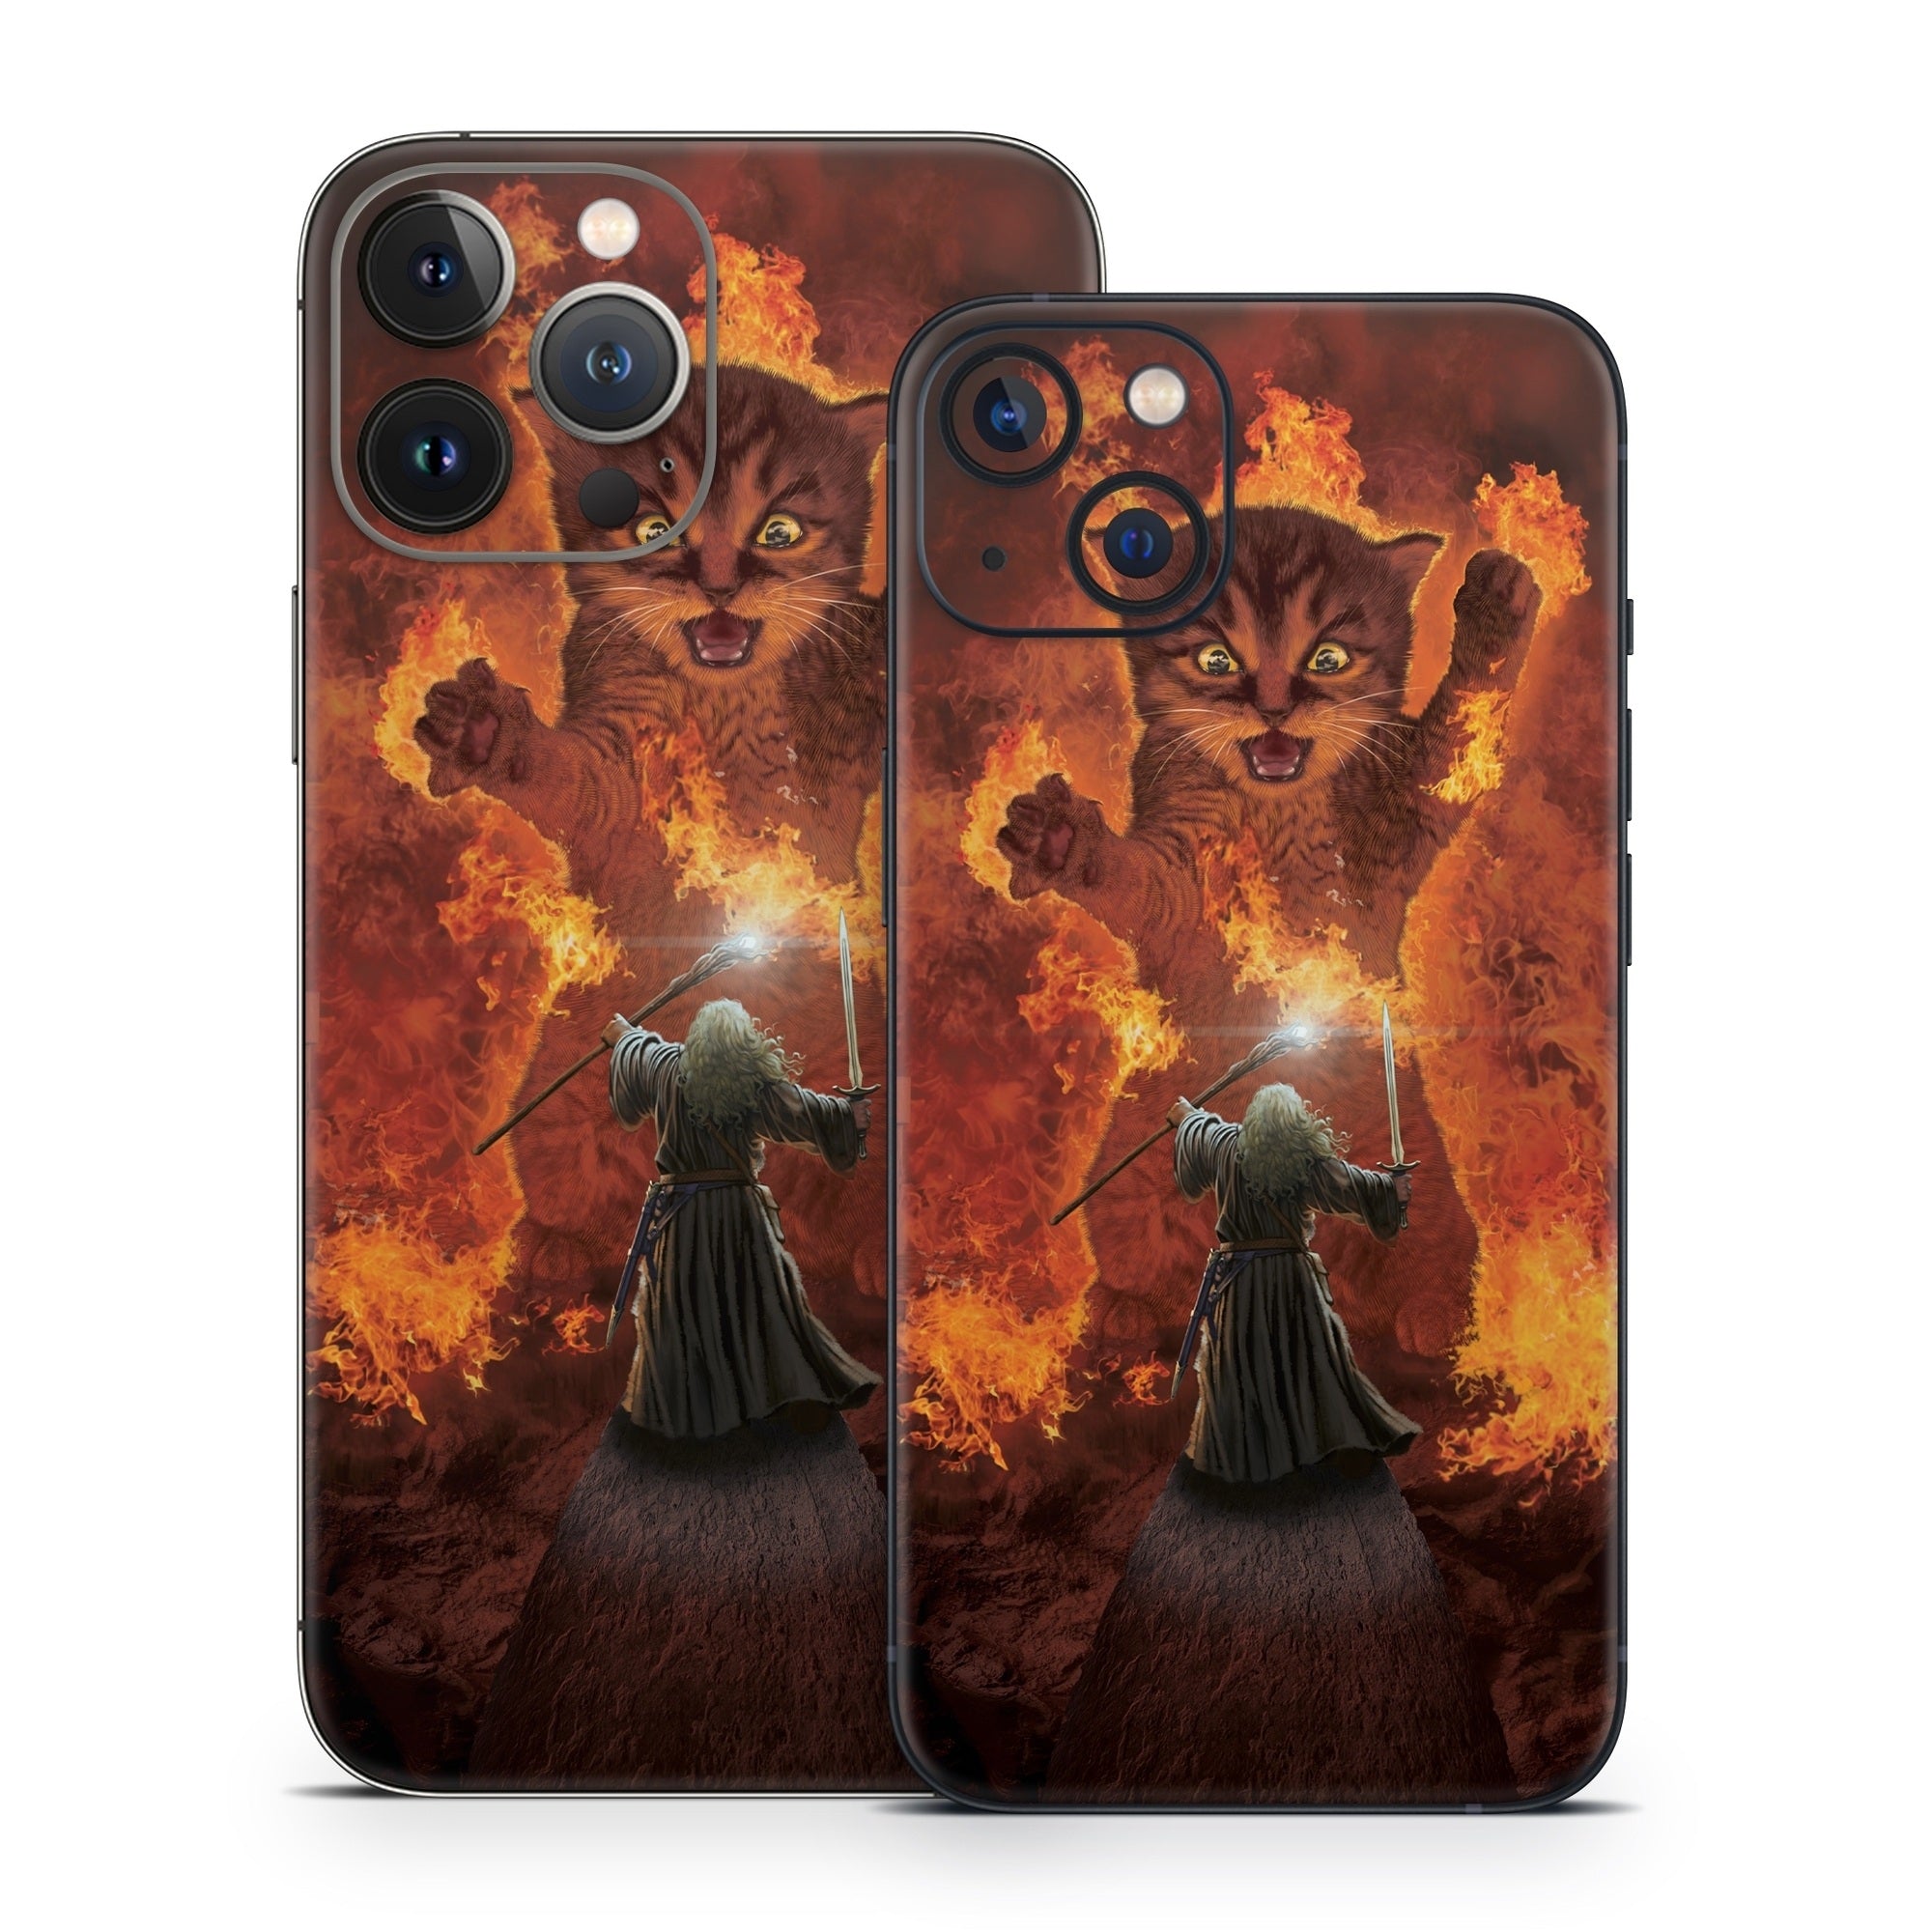 You Shall Not Pass - Apple iPhone 13 Skin